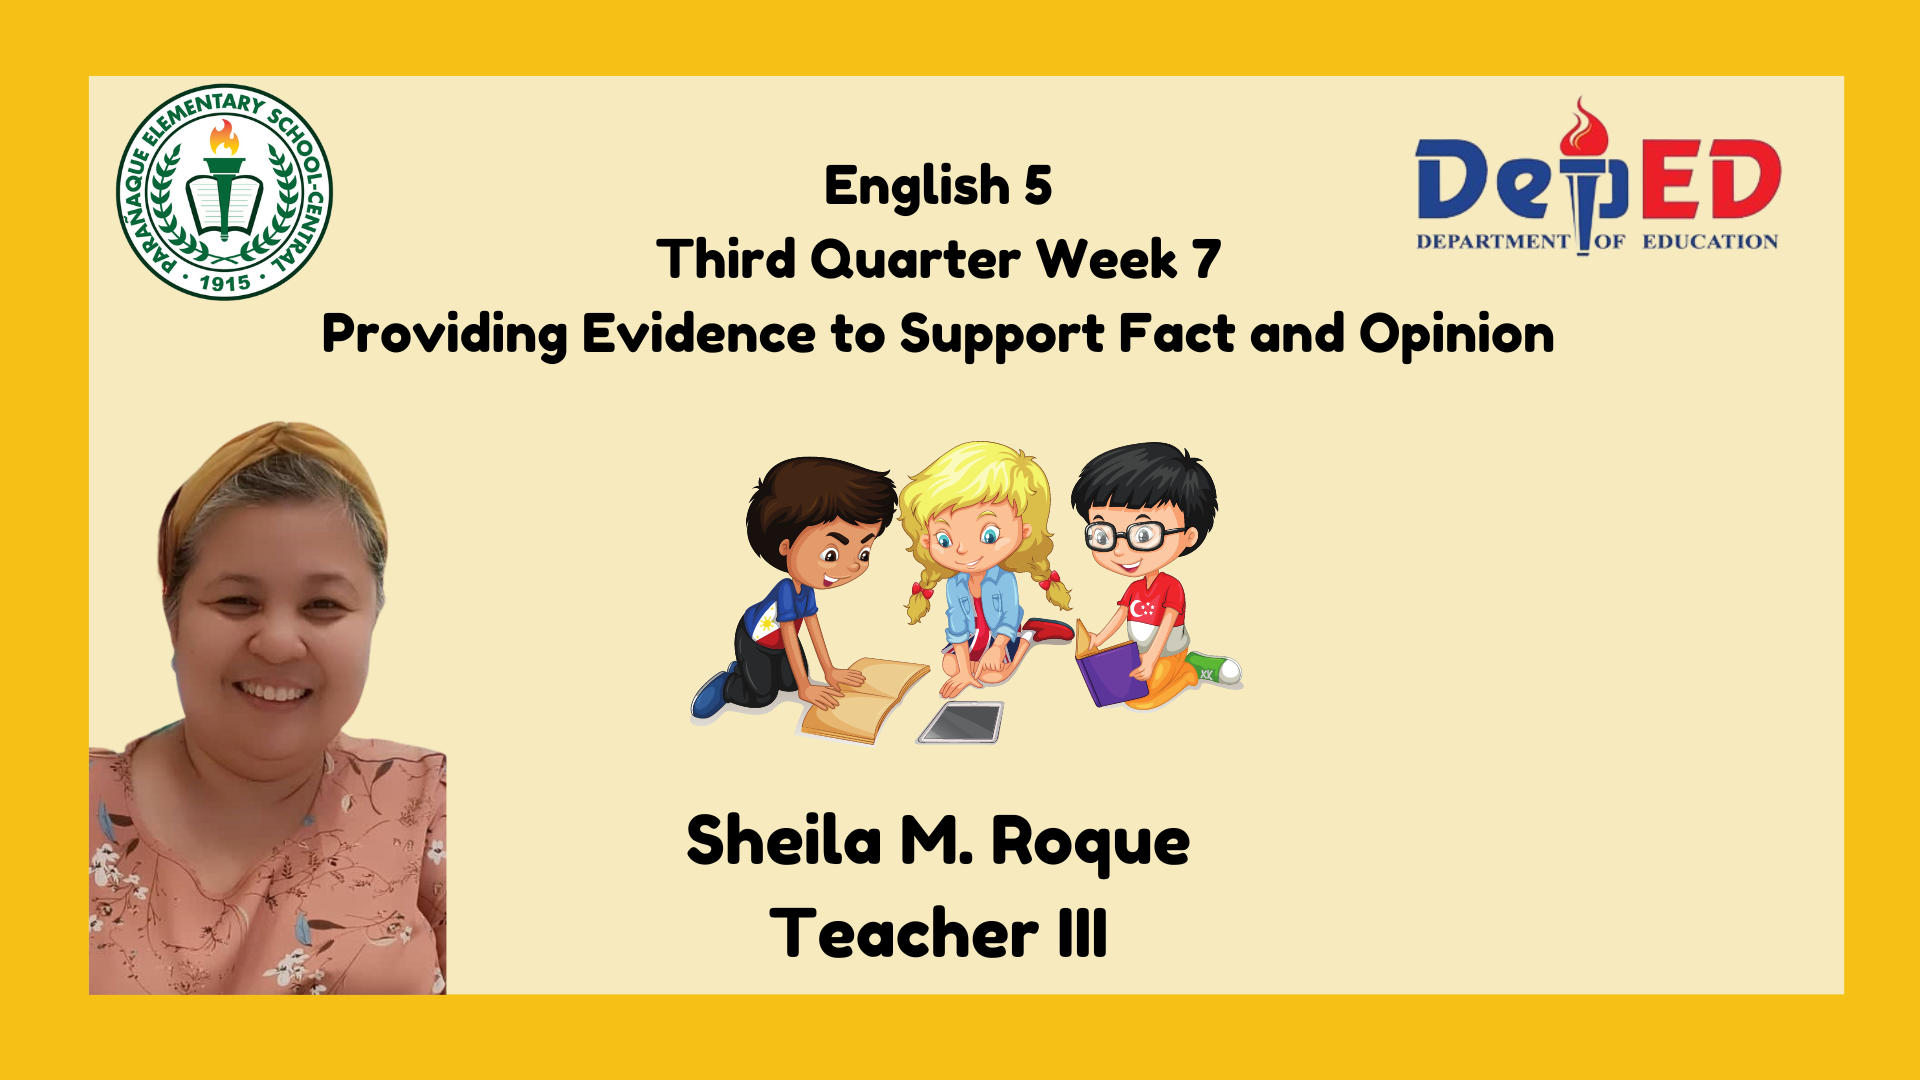 English 5 3rd Quarter Week 7: Providing Evidence to Support Fact and Opinion